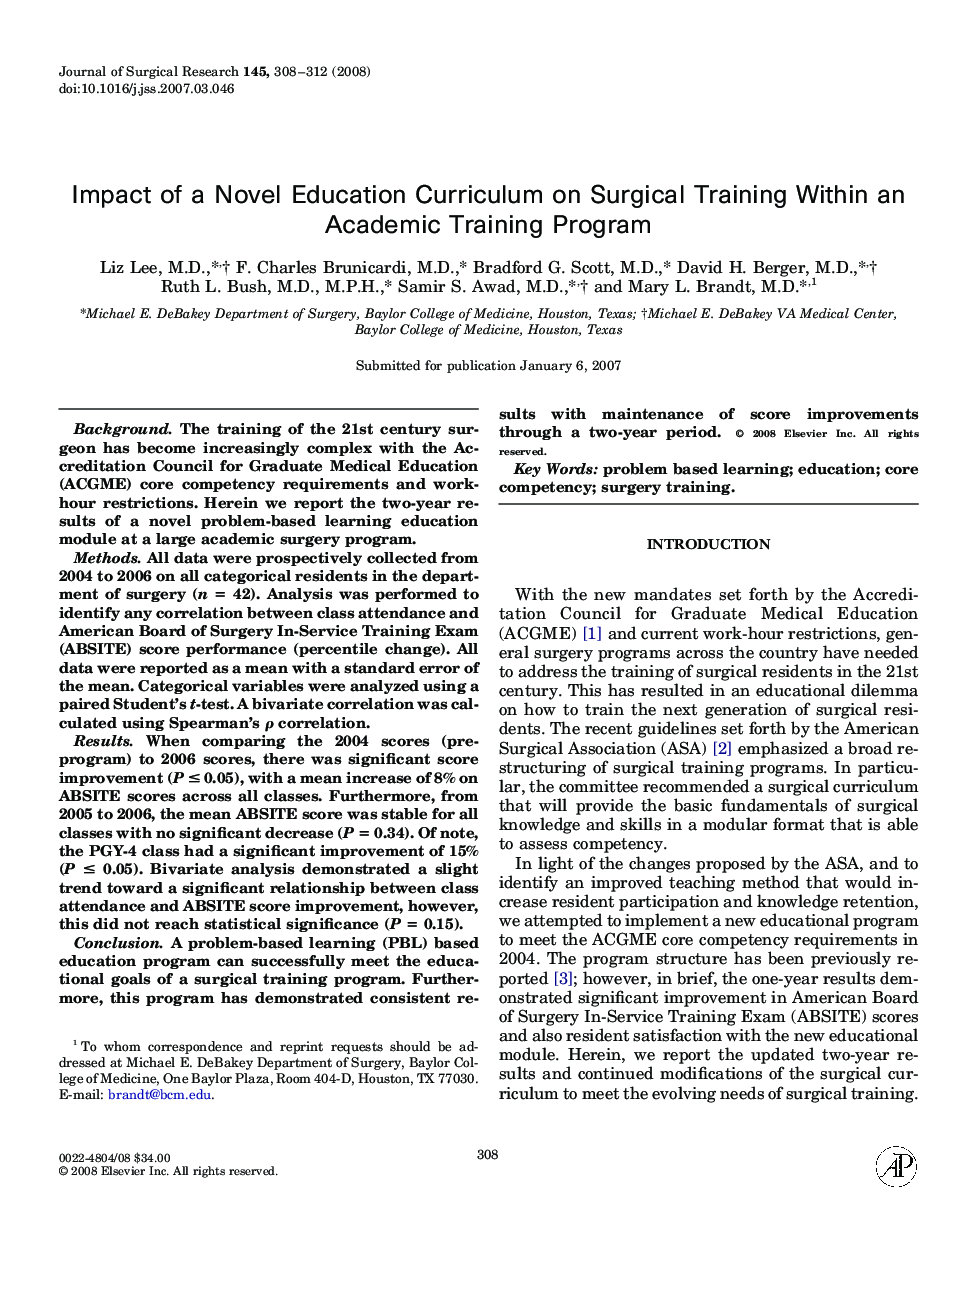 Impact of a Novel Education Curriculum on Surgical Training Within an Academic Training Program